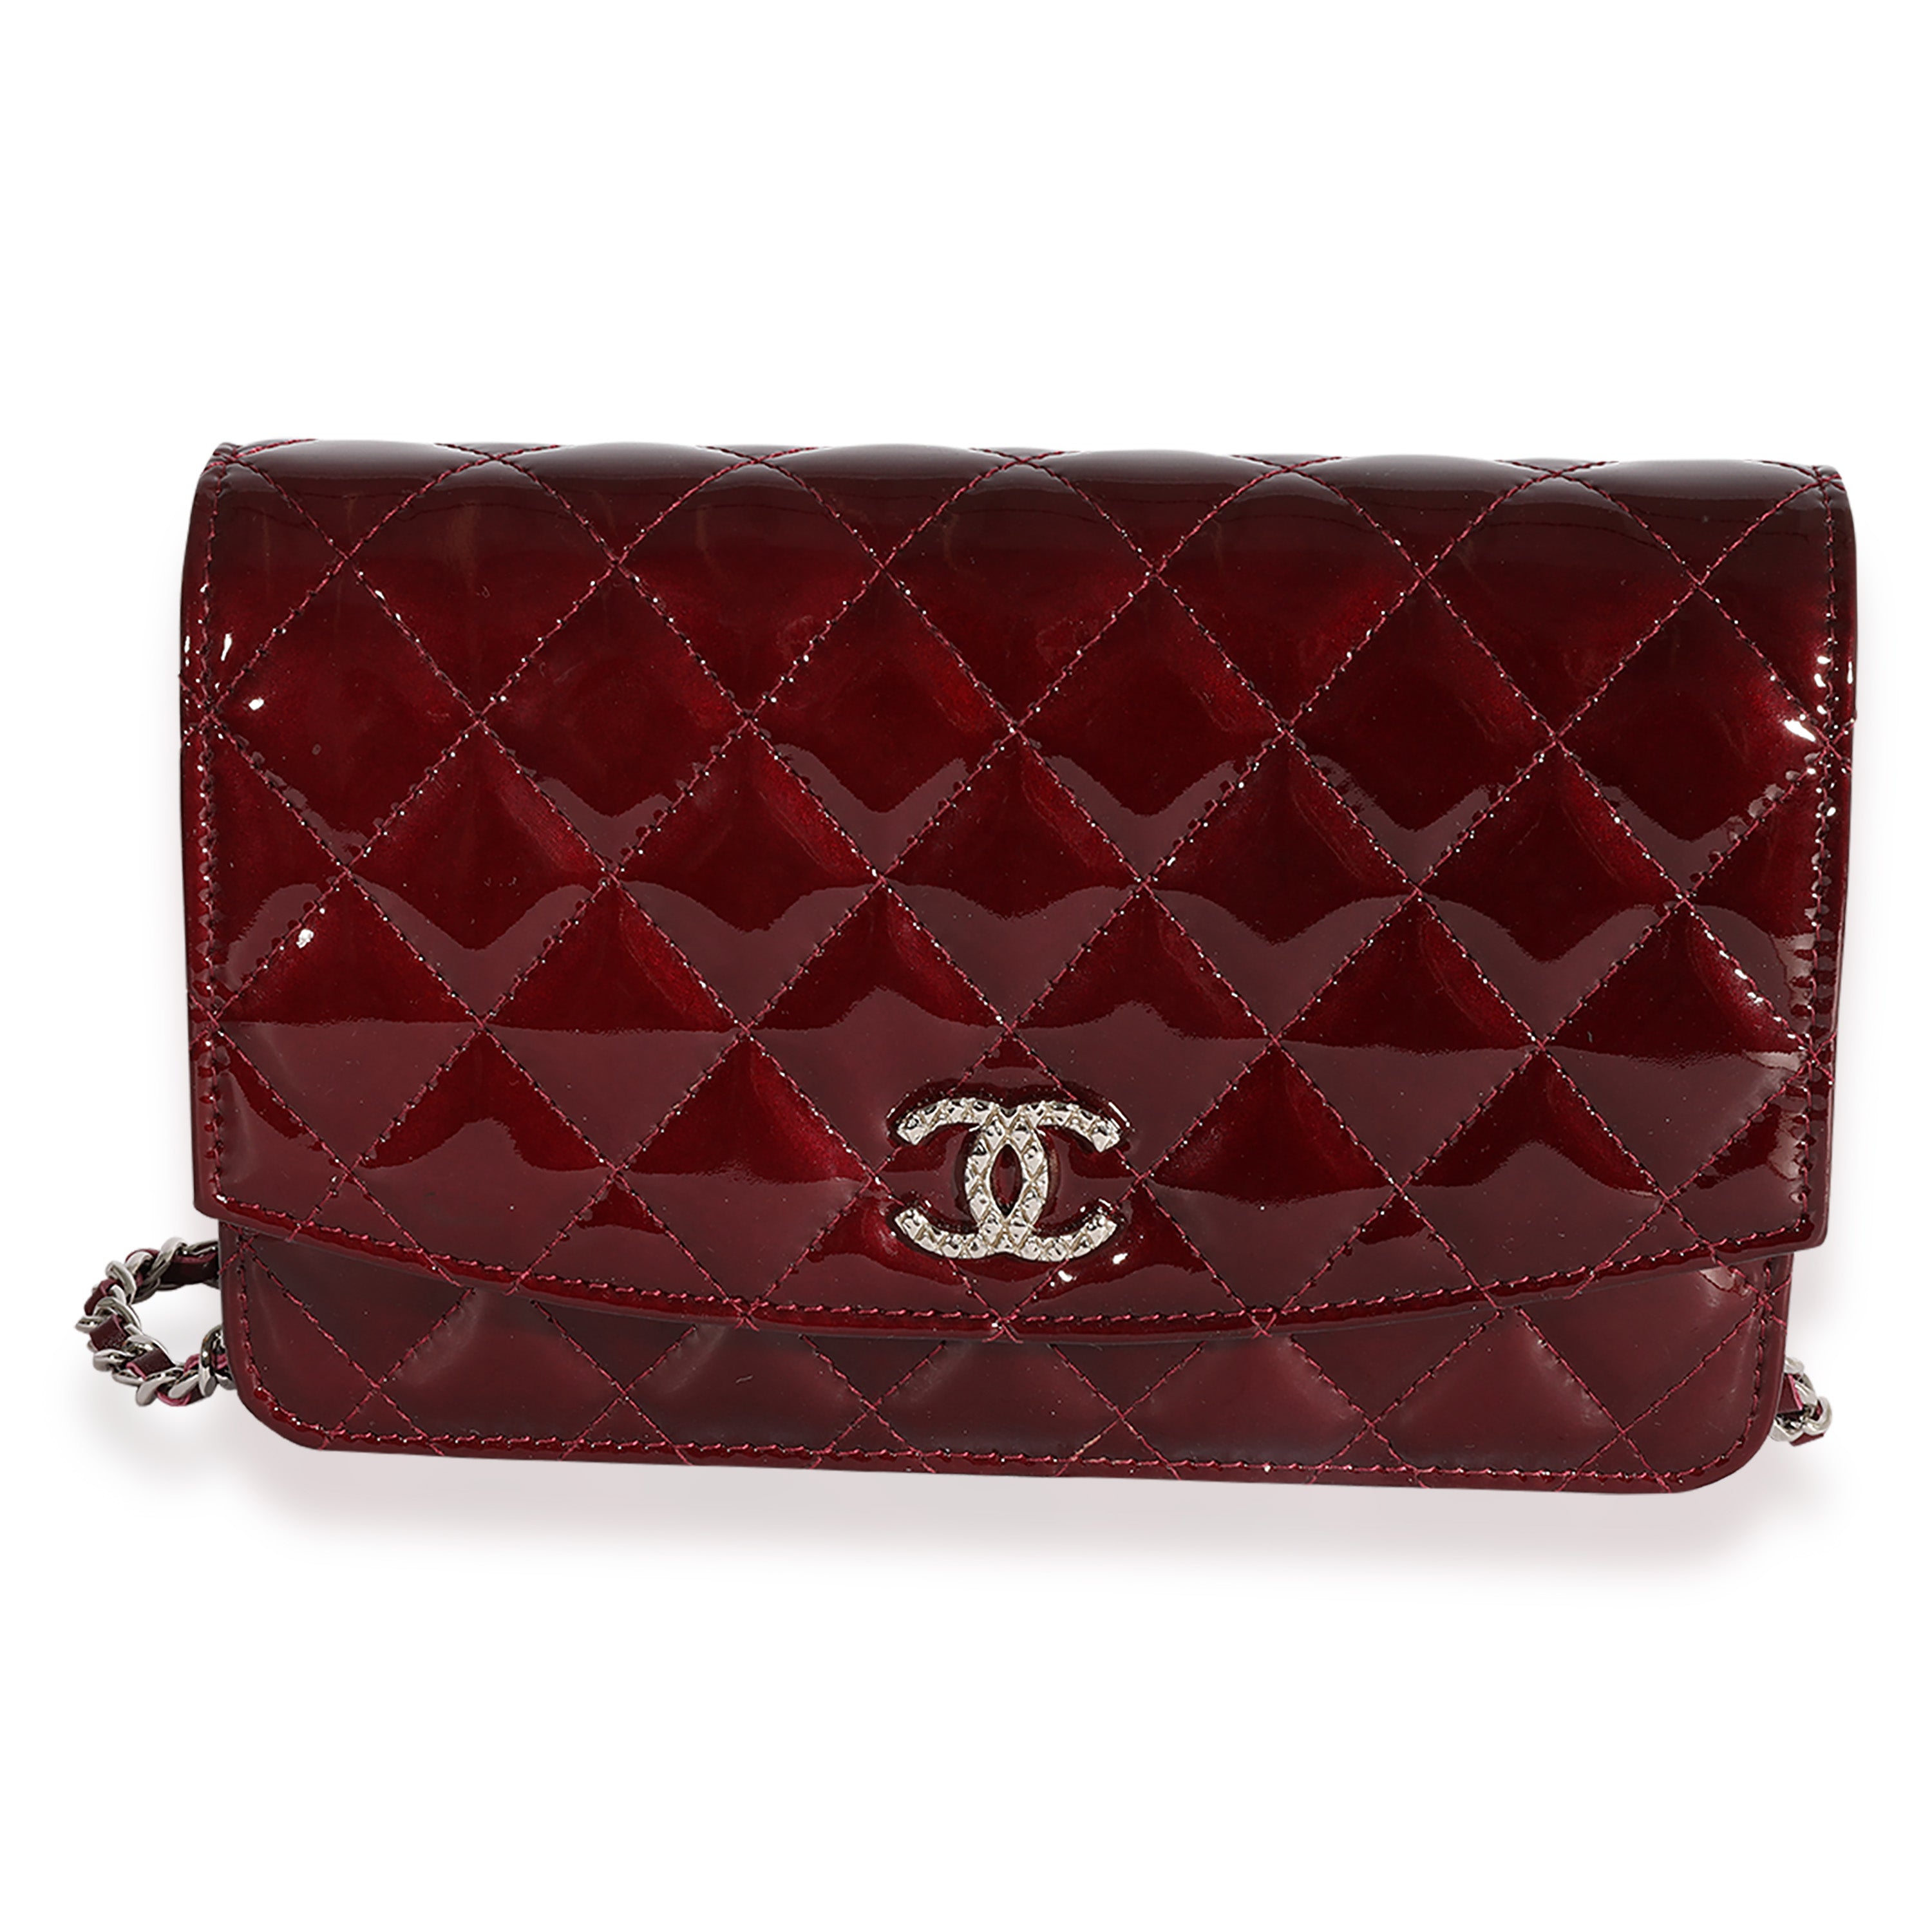 Chanel Burgundy Patent Leather Boy Wallet on Chain WOC 